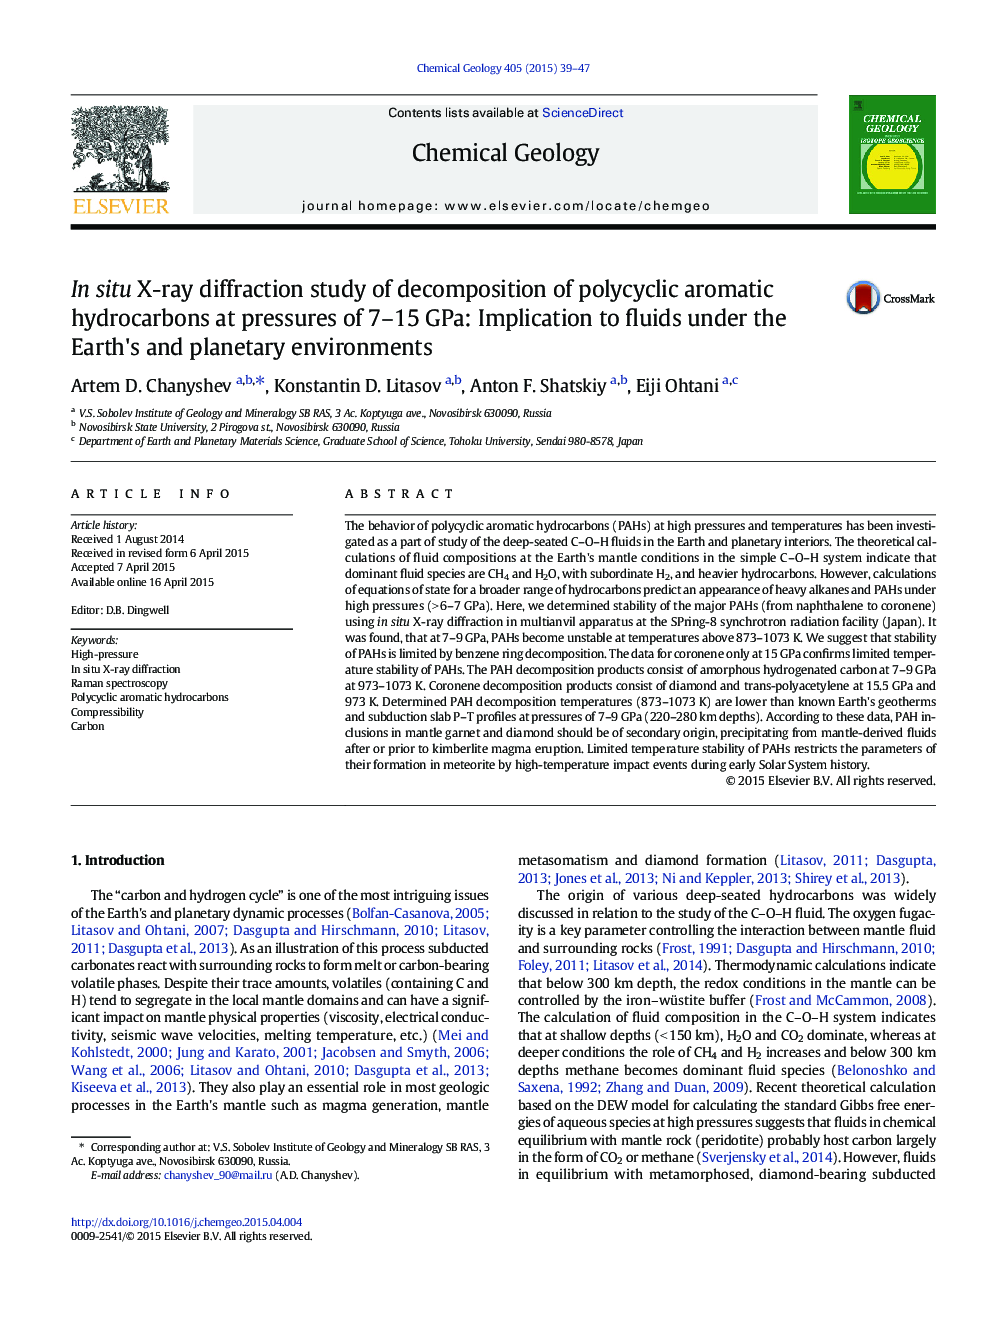 In situ X-ray diffraction study of decomposition of polycyclic aromatic hydrocarbons at pressures of 7-15Â GPa: Implication to fluids under the Earth's and planetary environments